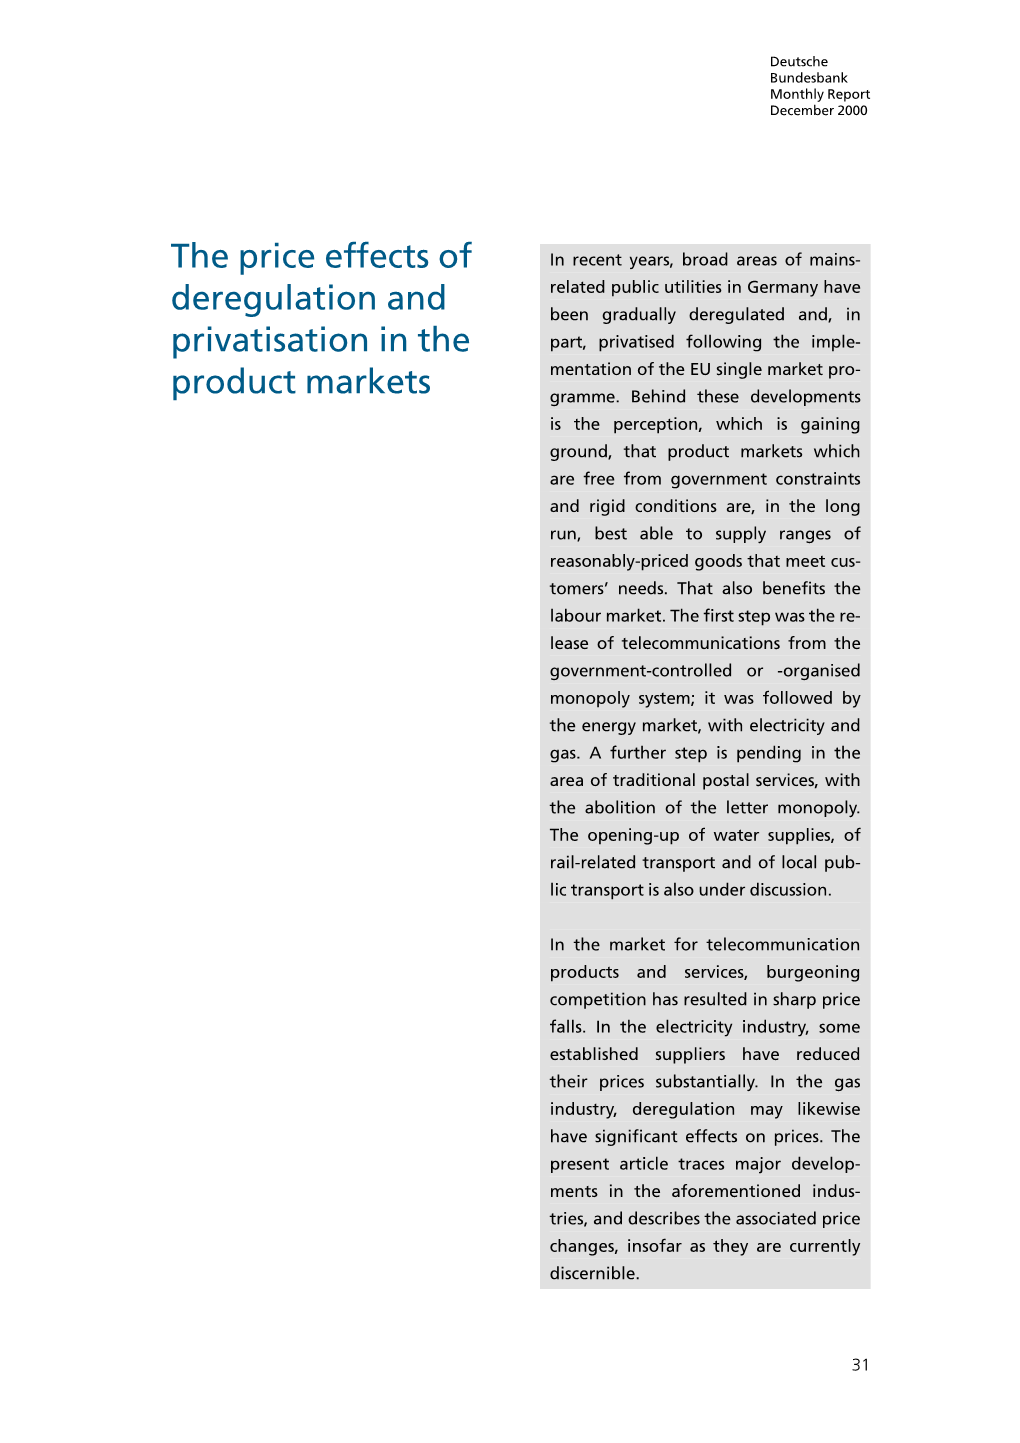 The Price Effects of Deregulation and Privatisation in the Product Markets